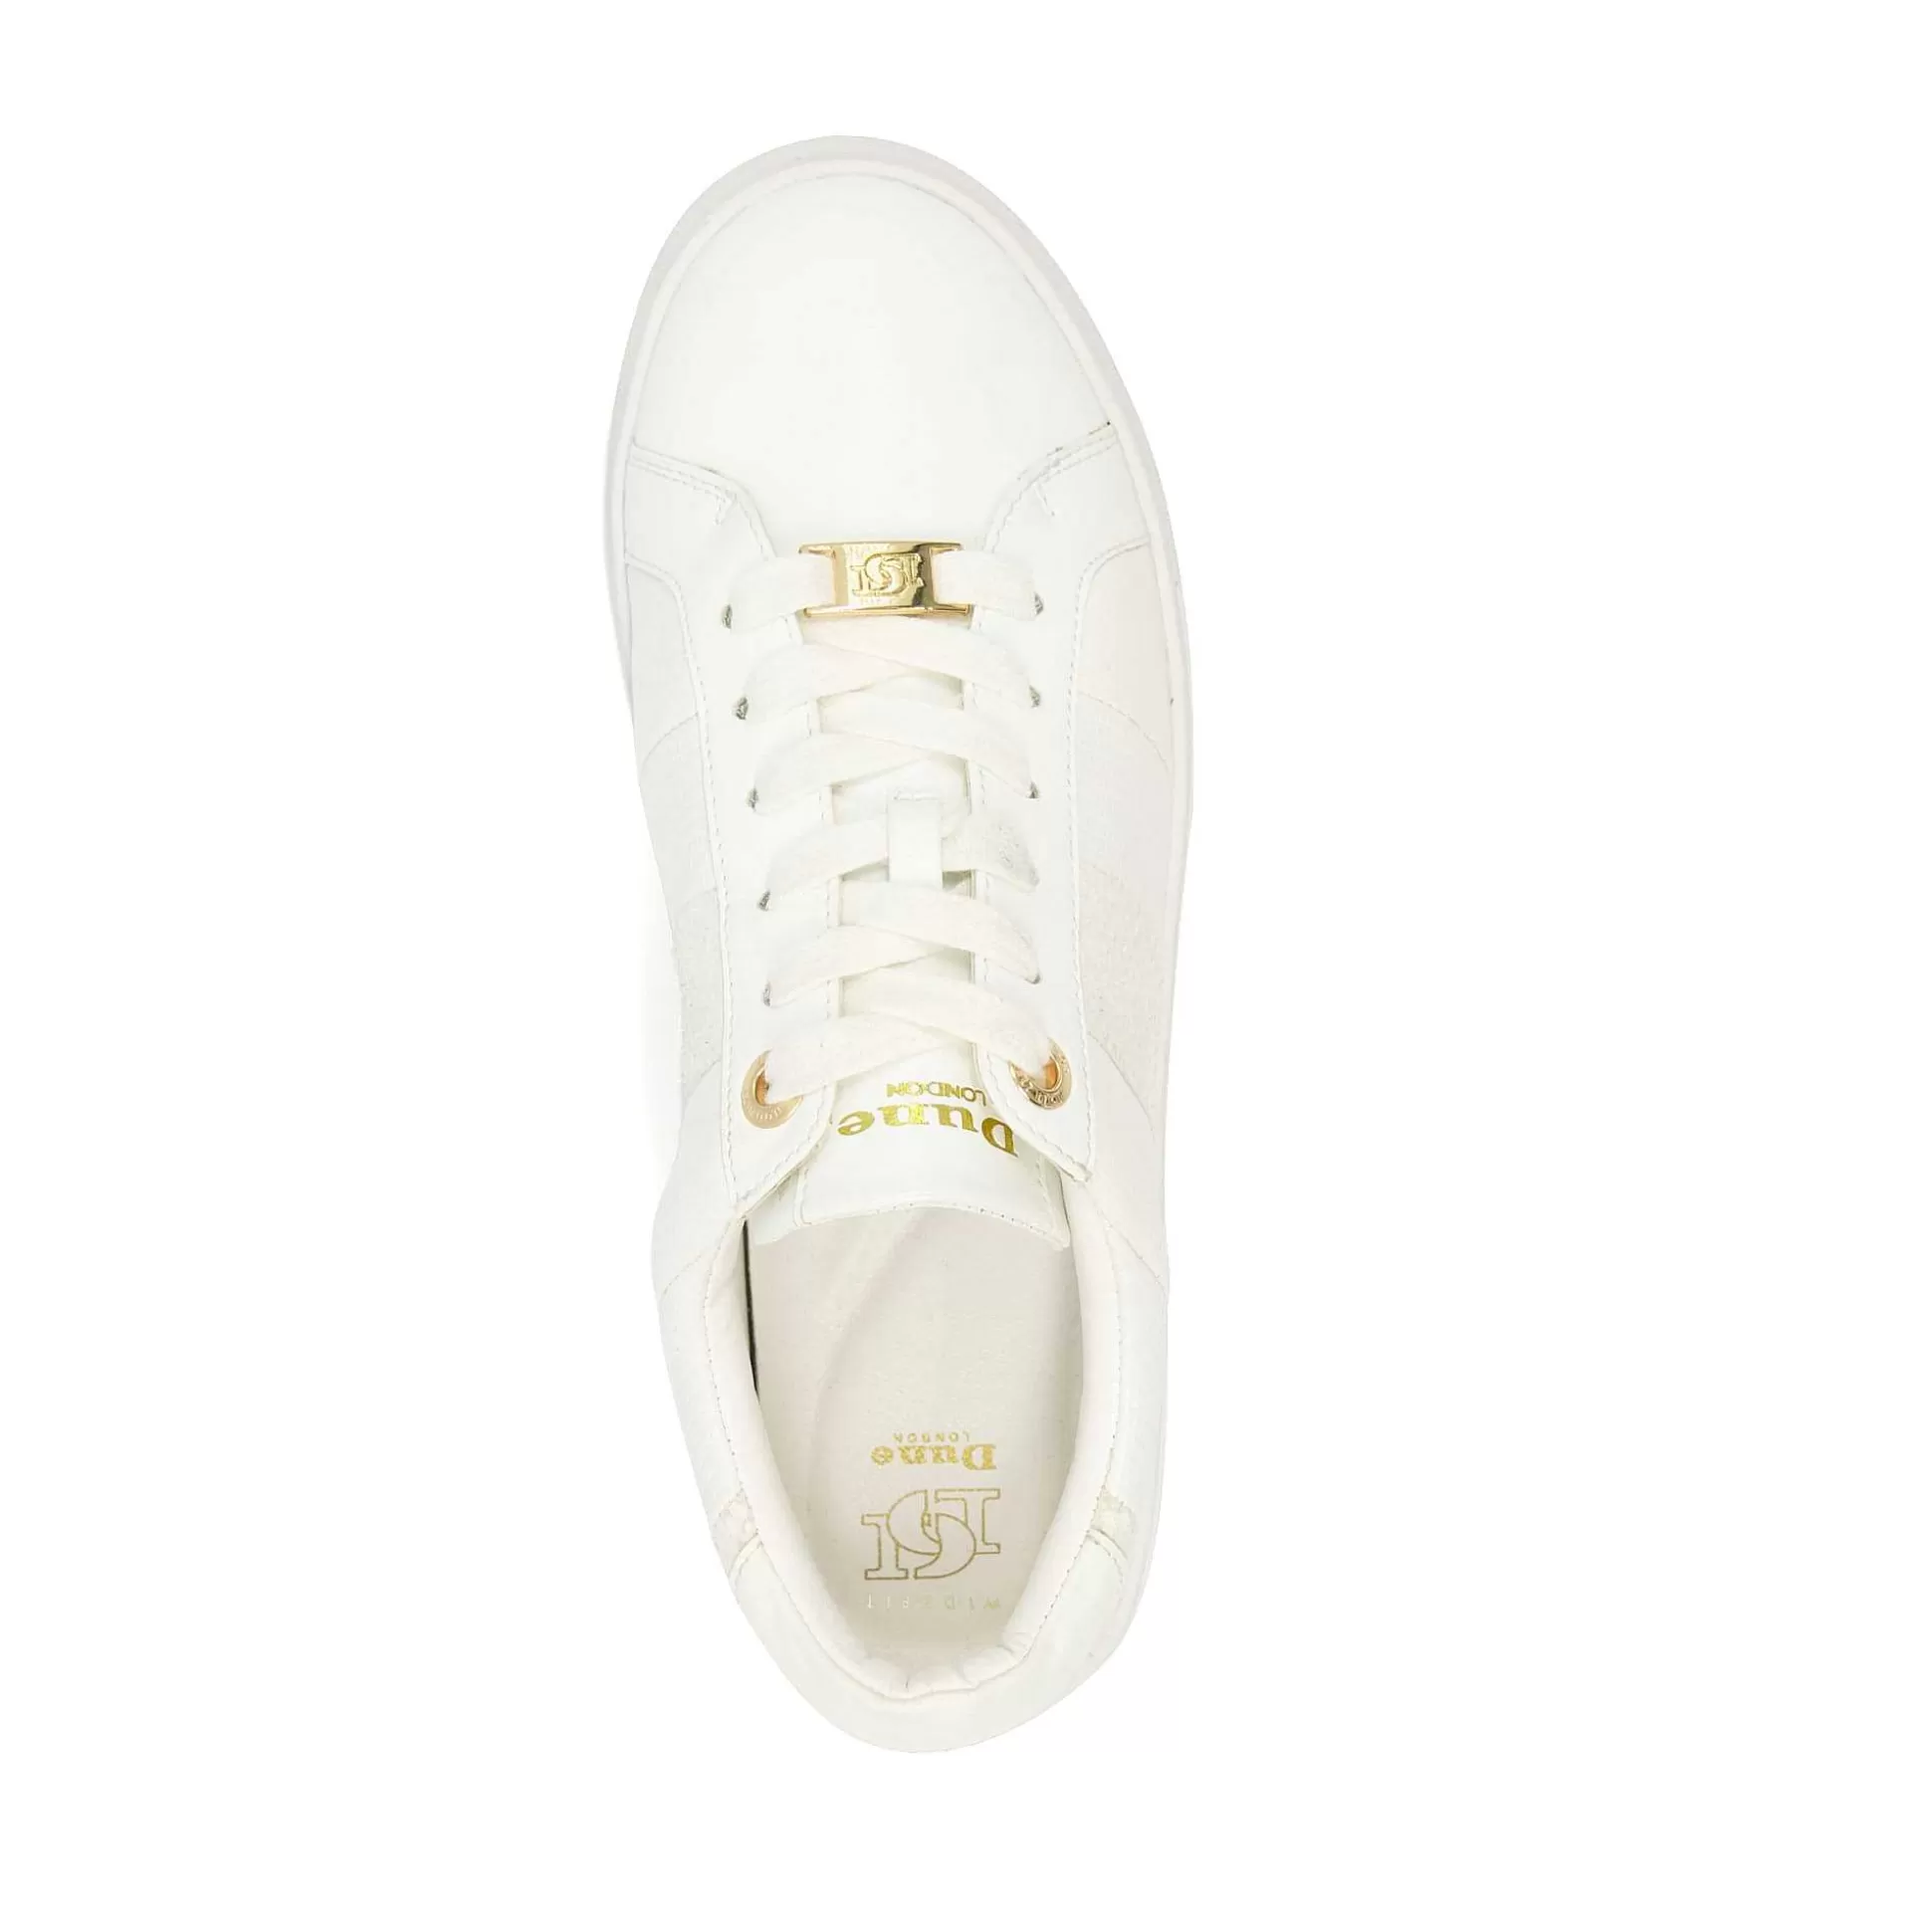 Dune London EVERLEIGH - WHITE-Women Flat Shoes | Wide Fit Shoes